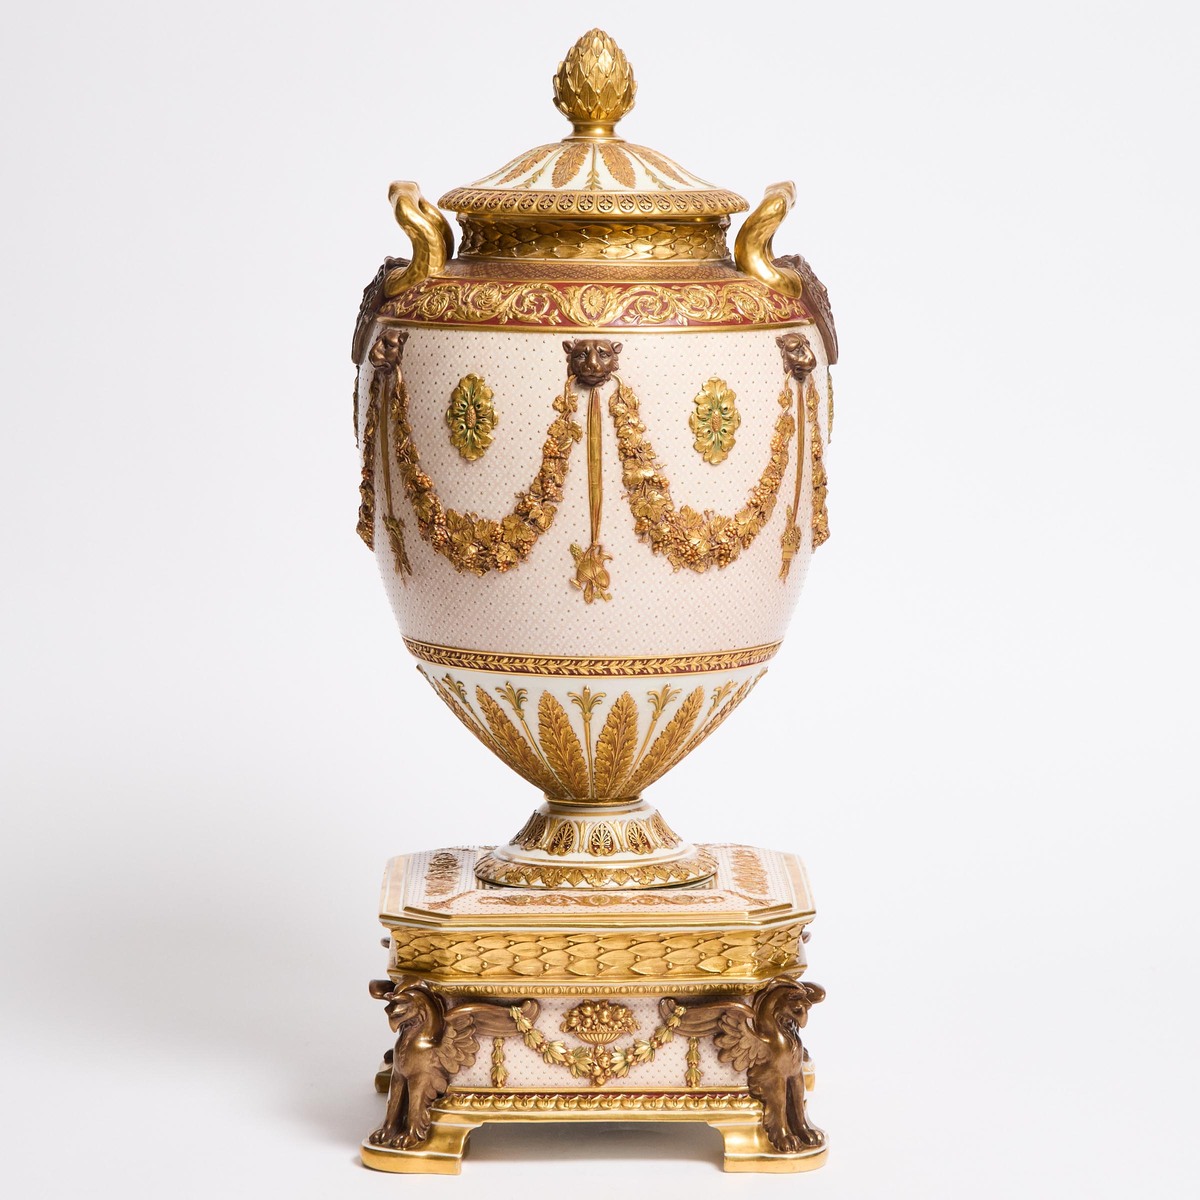 Wedgwood Bronzed and Gilt Victoria Ware Large Covered Urn, c.1900, overall height 37 in — 94 cm